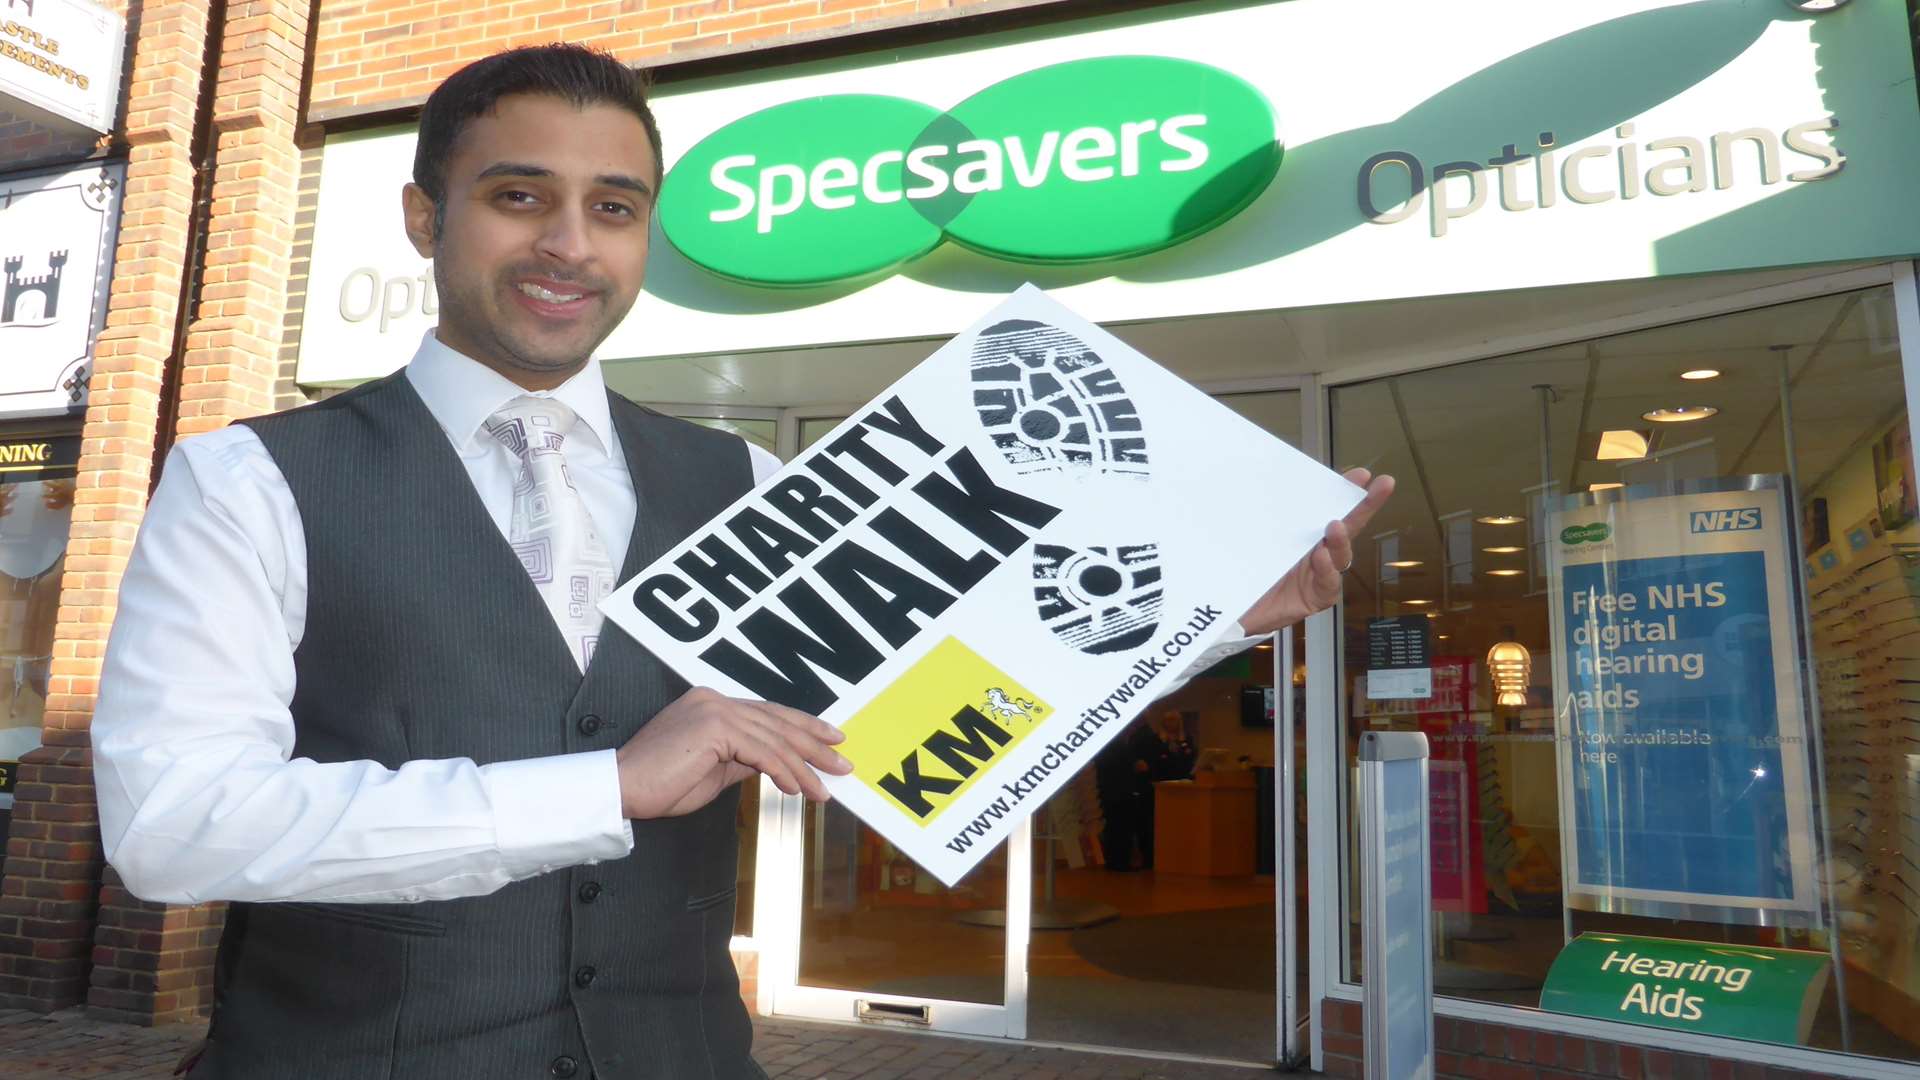 Kent Specsavers spokesman Pritin Patel announces the company's support of the 21st anniversary KM Charity Walk being staged on June 26.